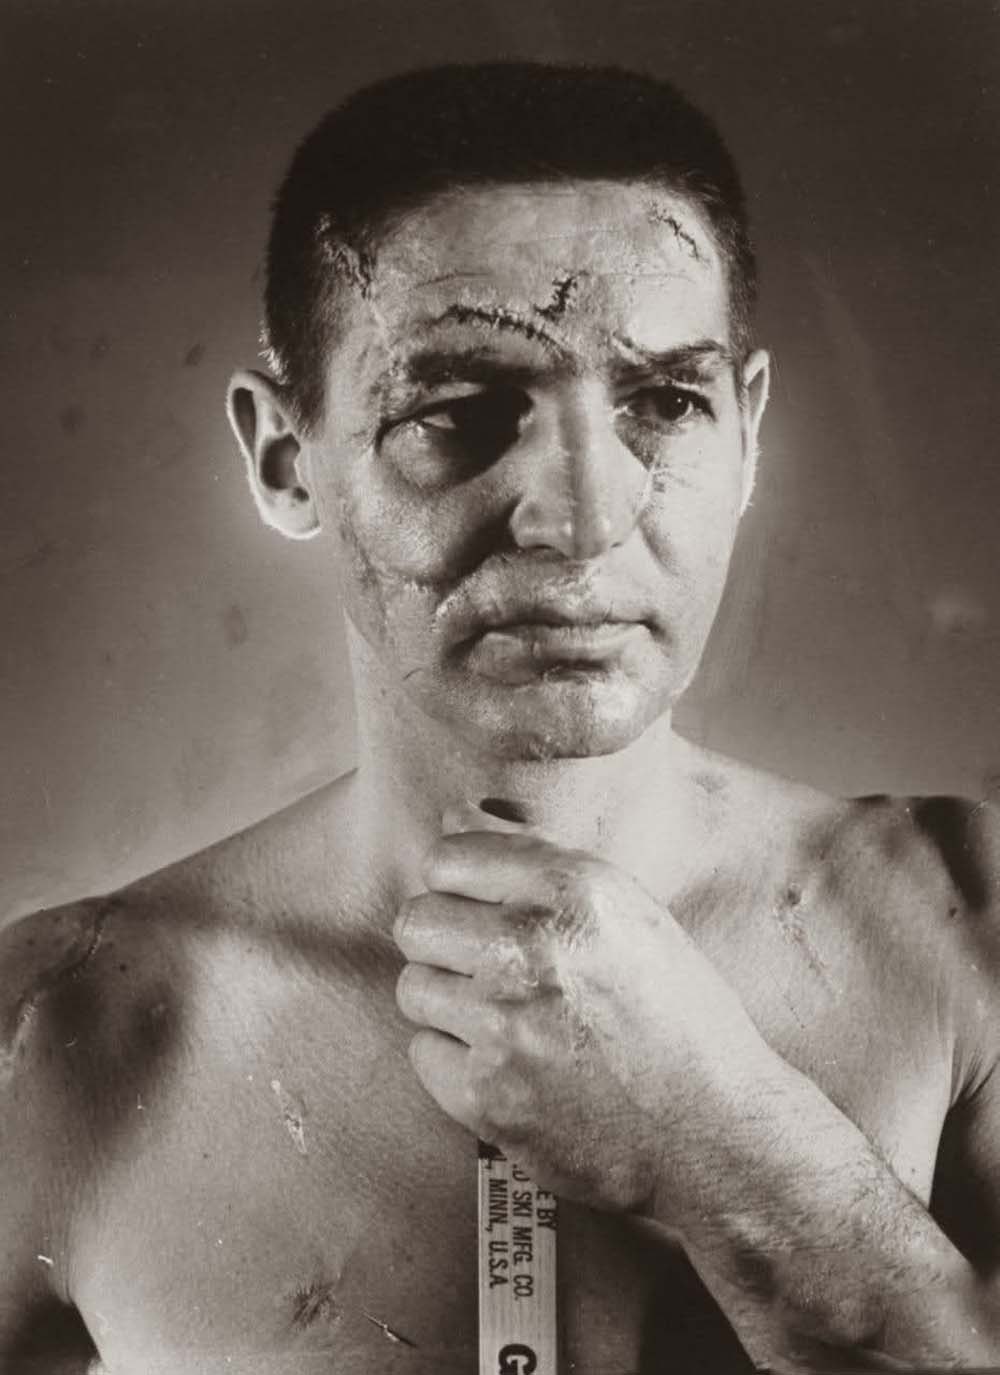 1446740270_terry-sawchuk-the-face-of-a-hockey-goalie-before-masks-became-standard-game-equipment-1966